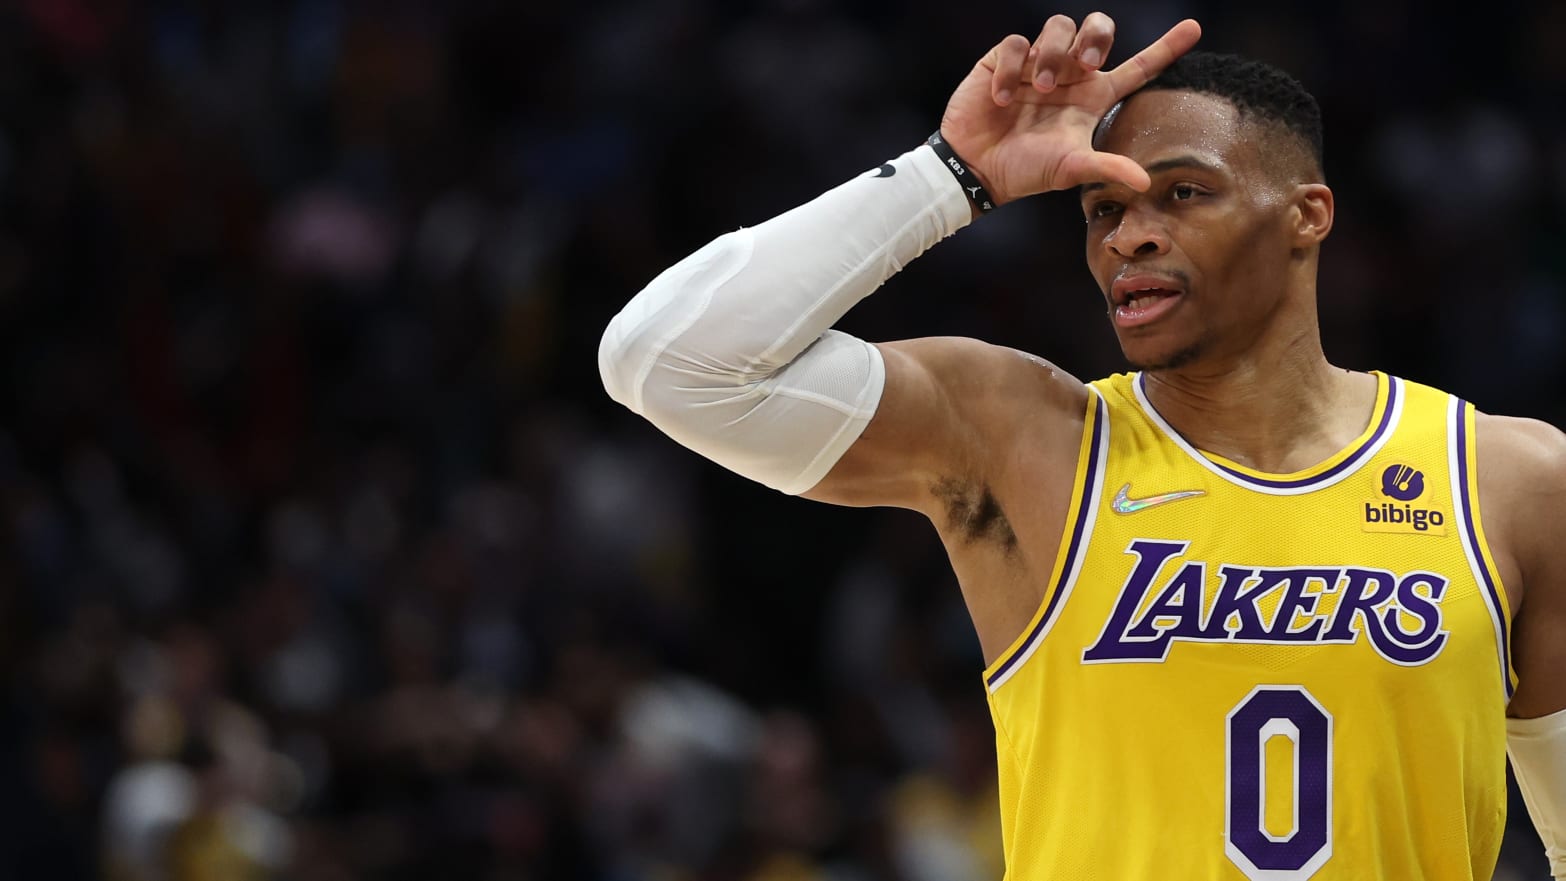 Russell Westbrook signing with Clippers after messy Lakers tenure